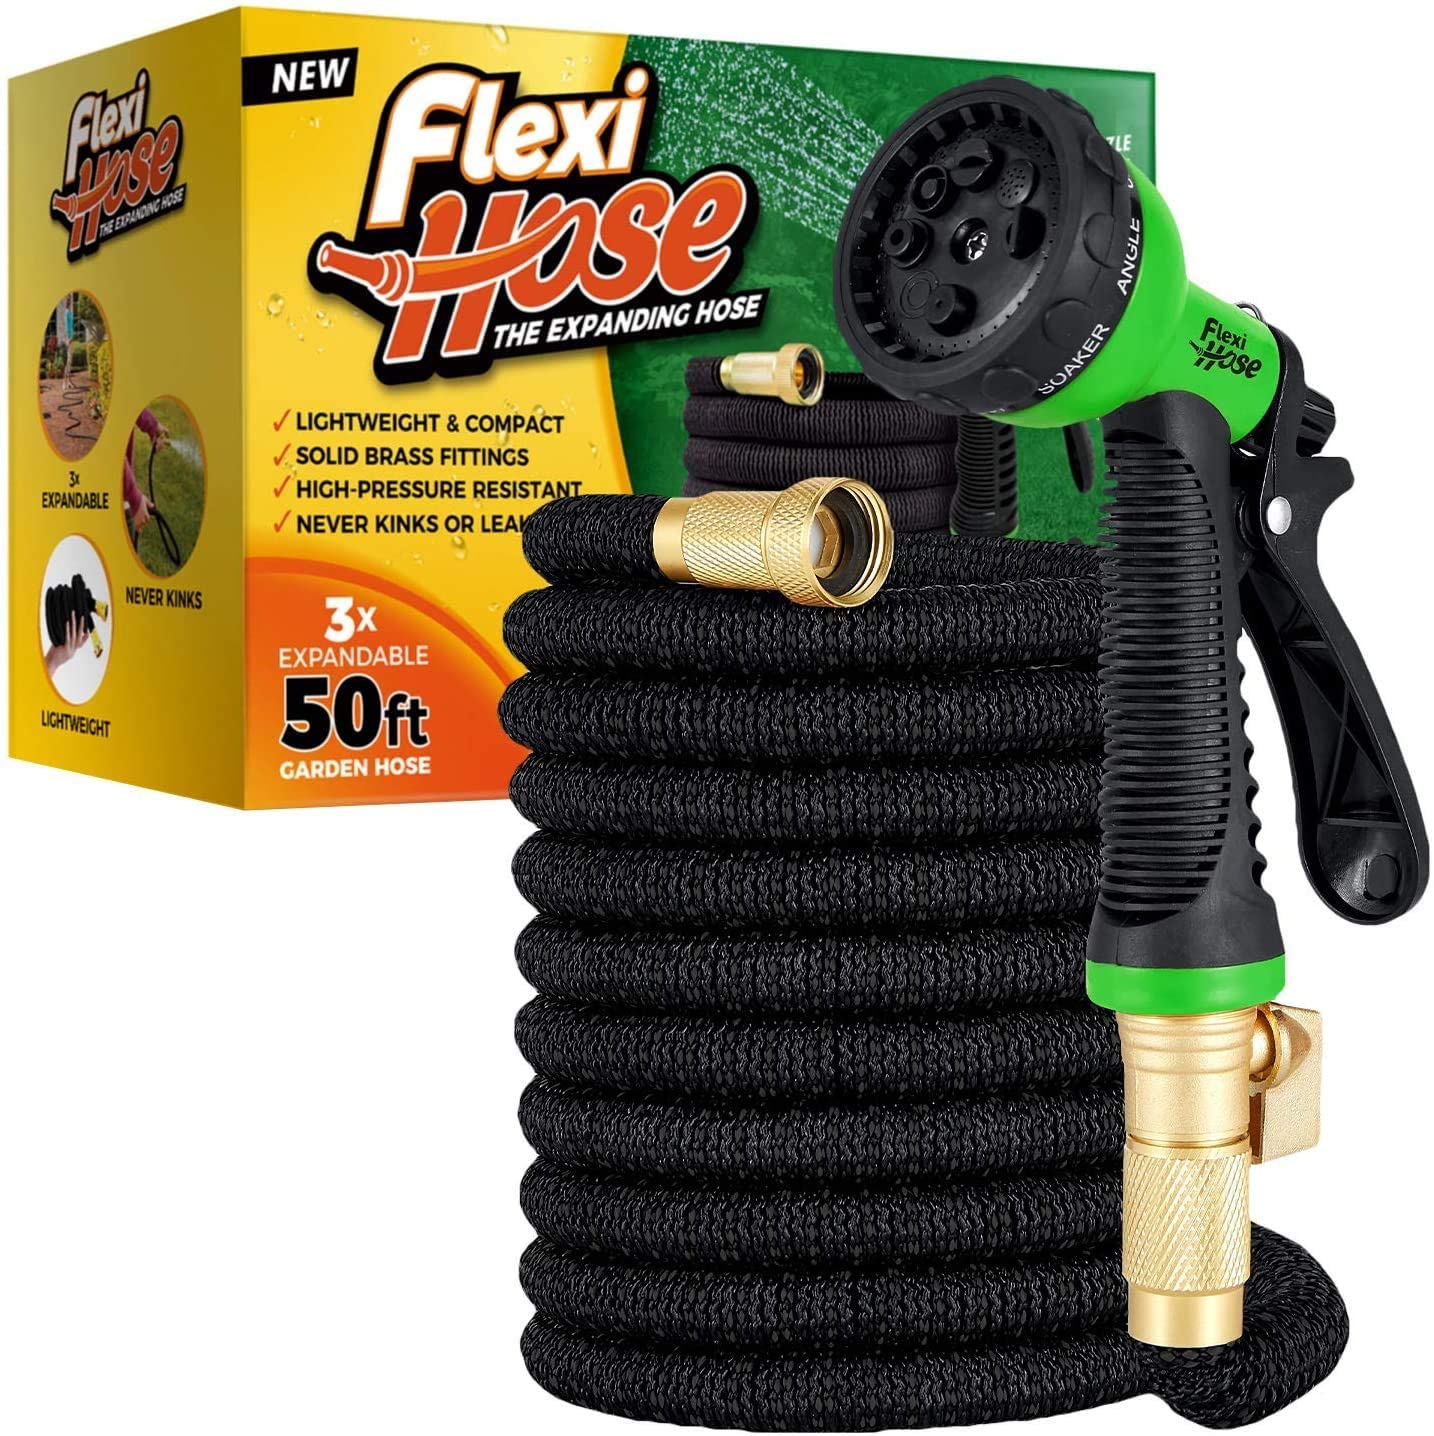 Flexi Hose with 8 Function Nozzle, Lightweight Expandable Garden Hose, No-Kink Flexibility, 3/4 Inch Solid Brass Fittings - image 1 of 8